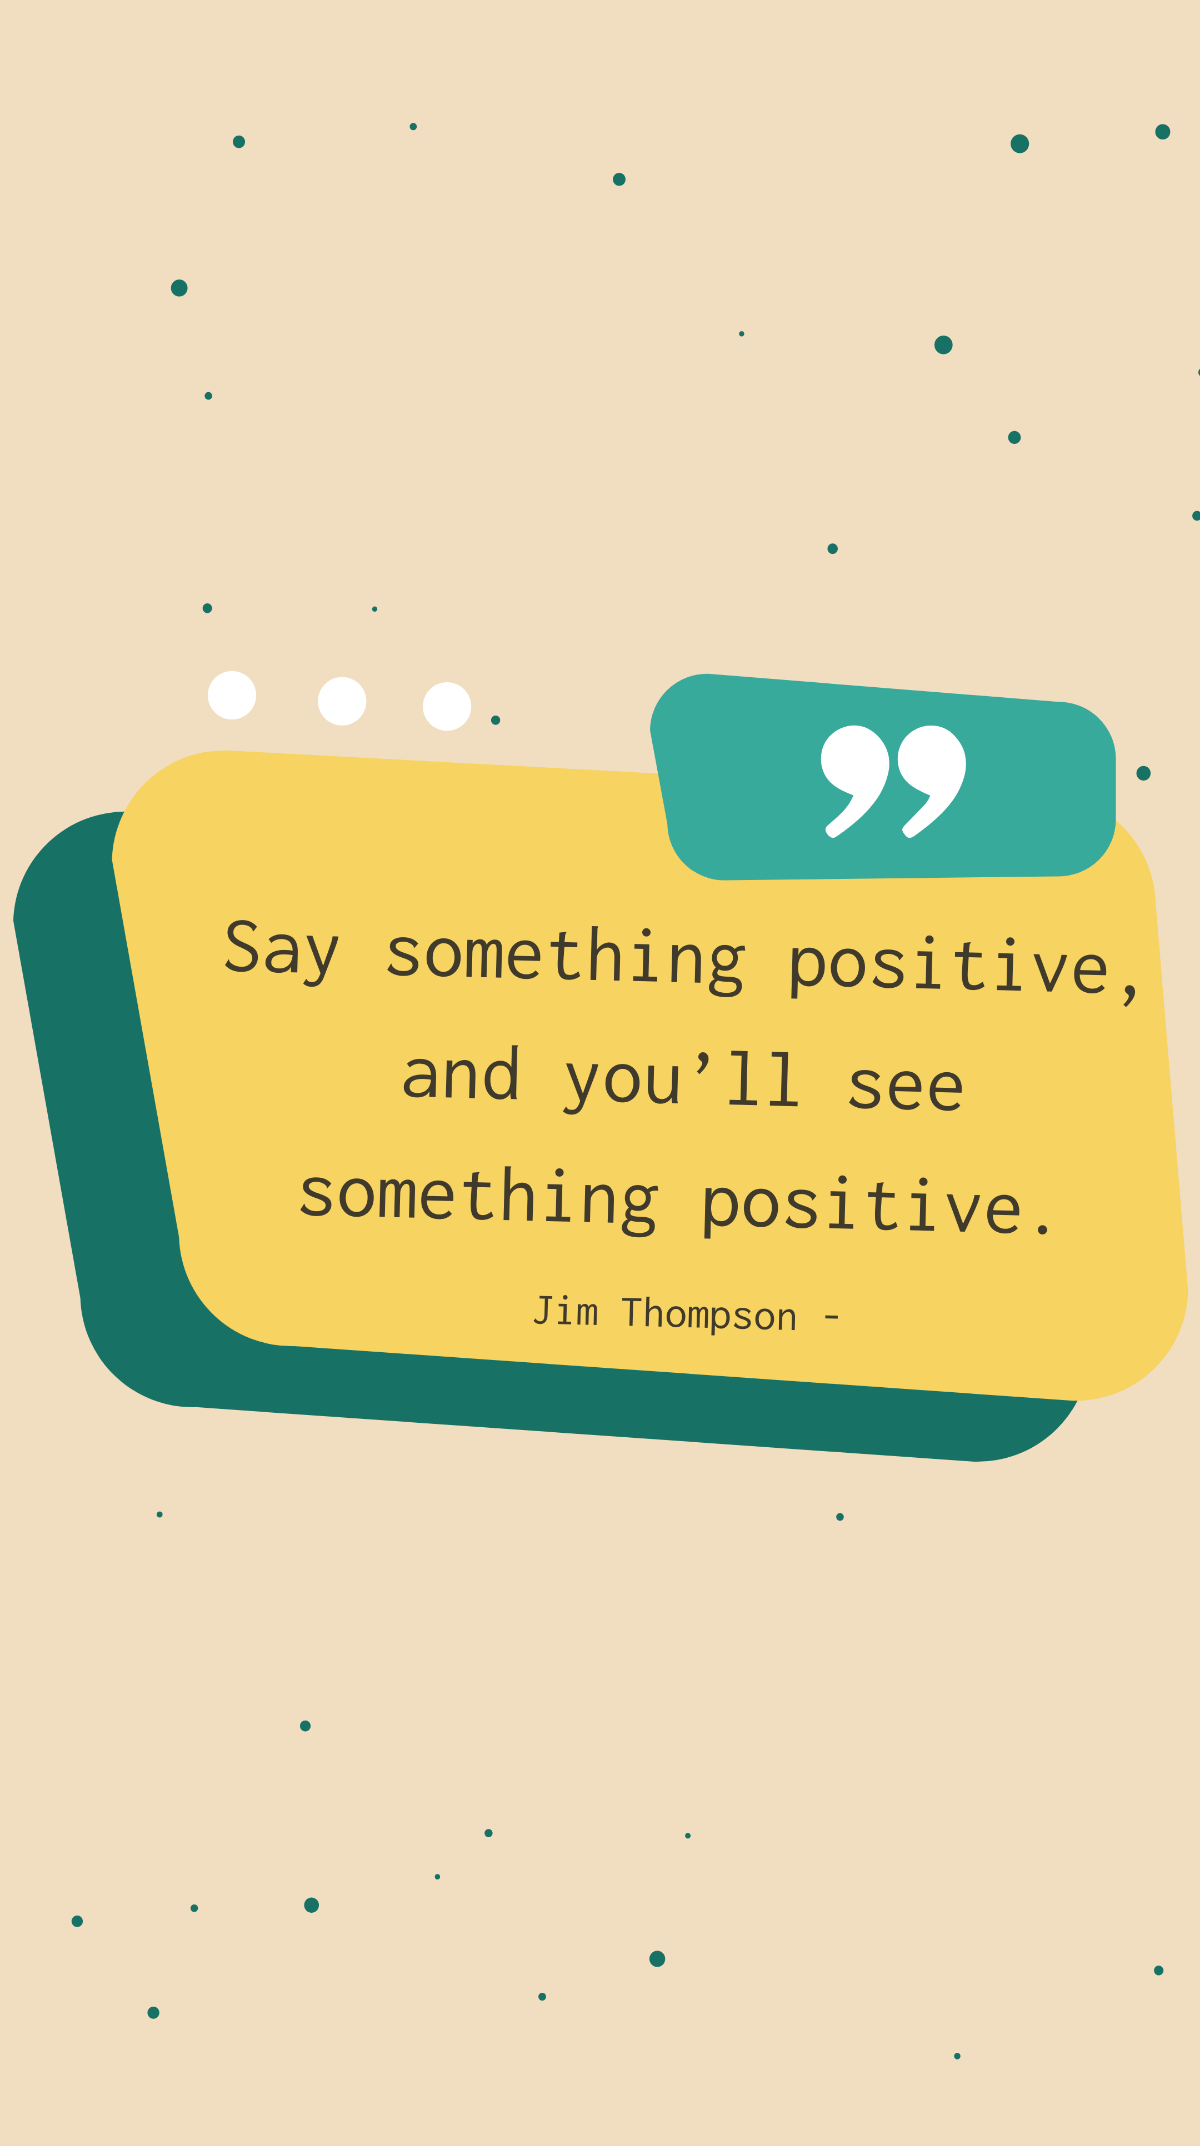 Jim Thompson - Say something positive, and you’ll see something positive. Template